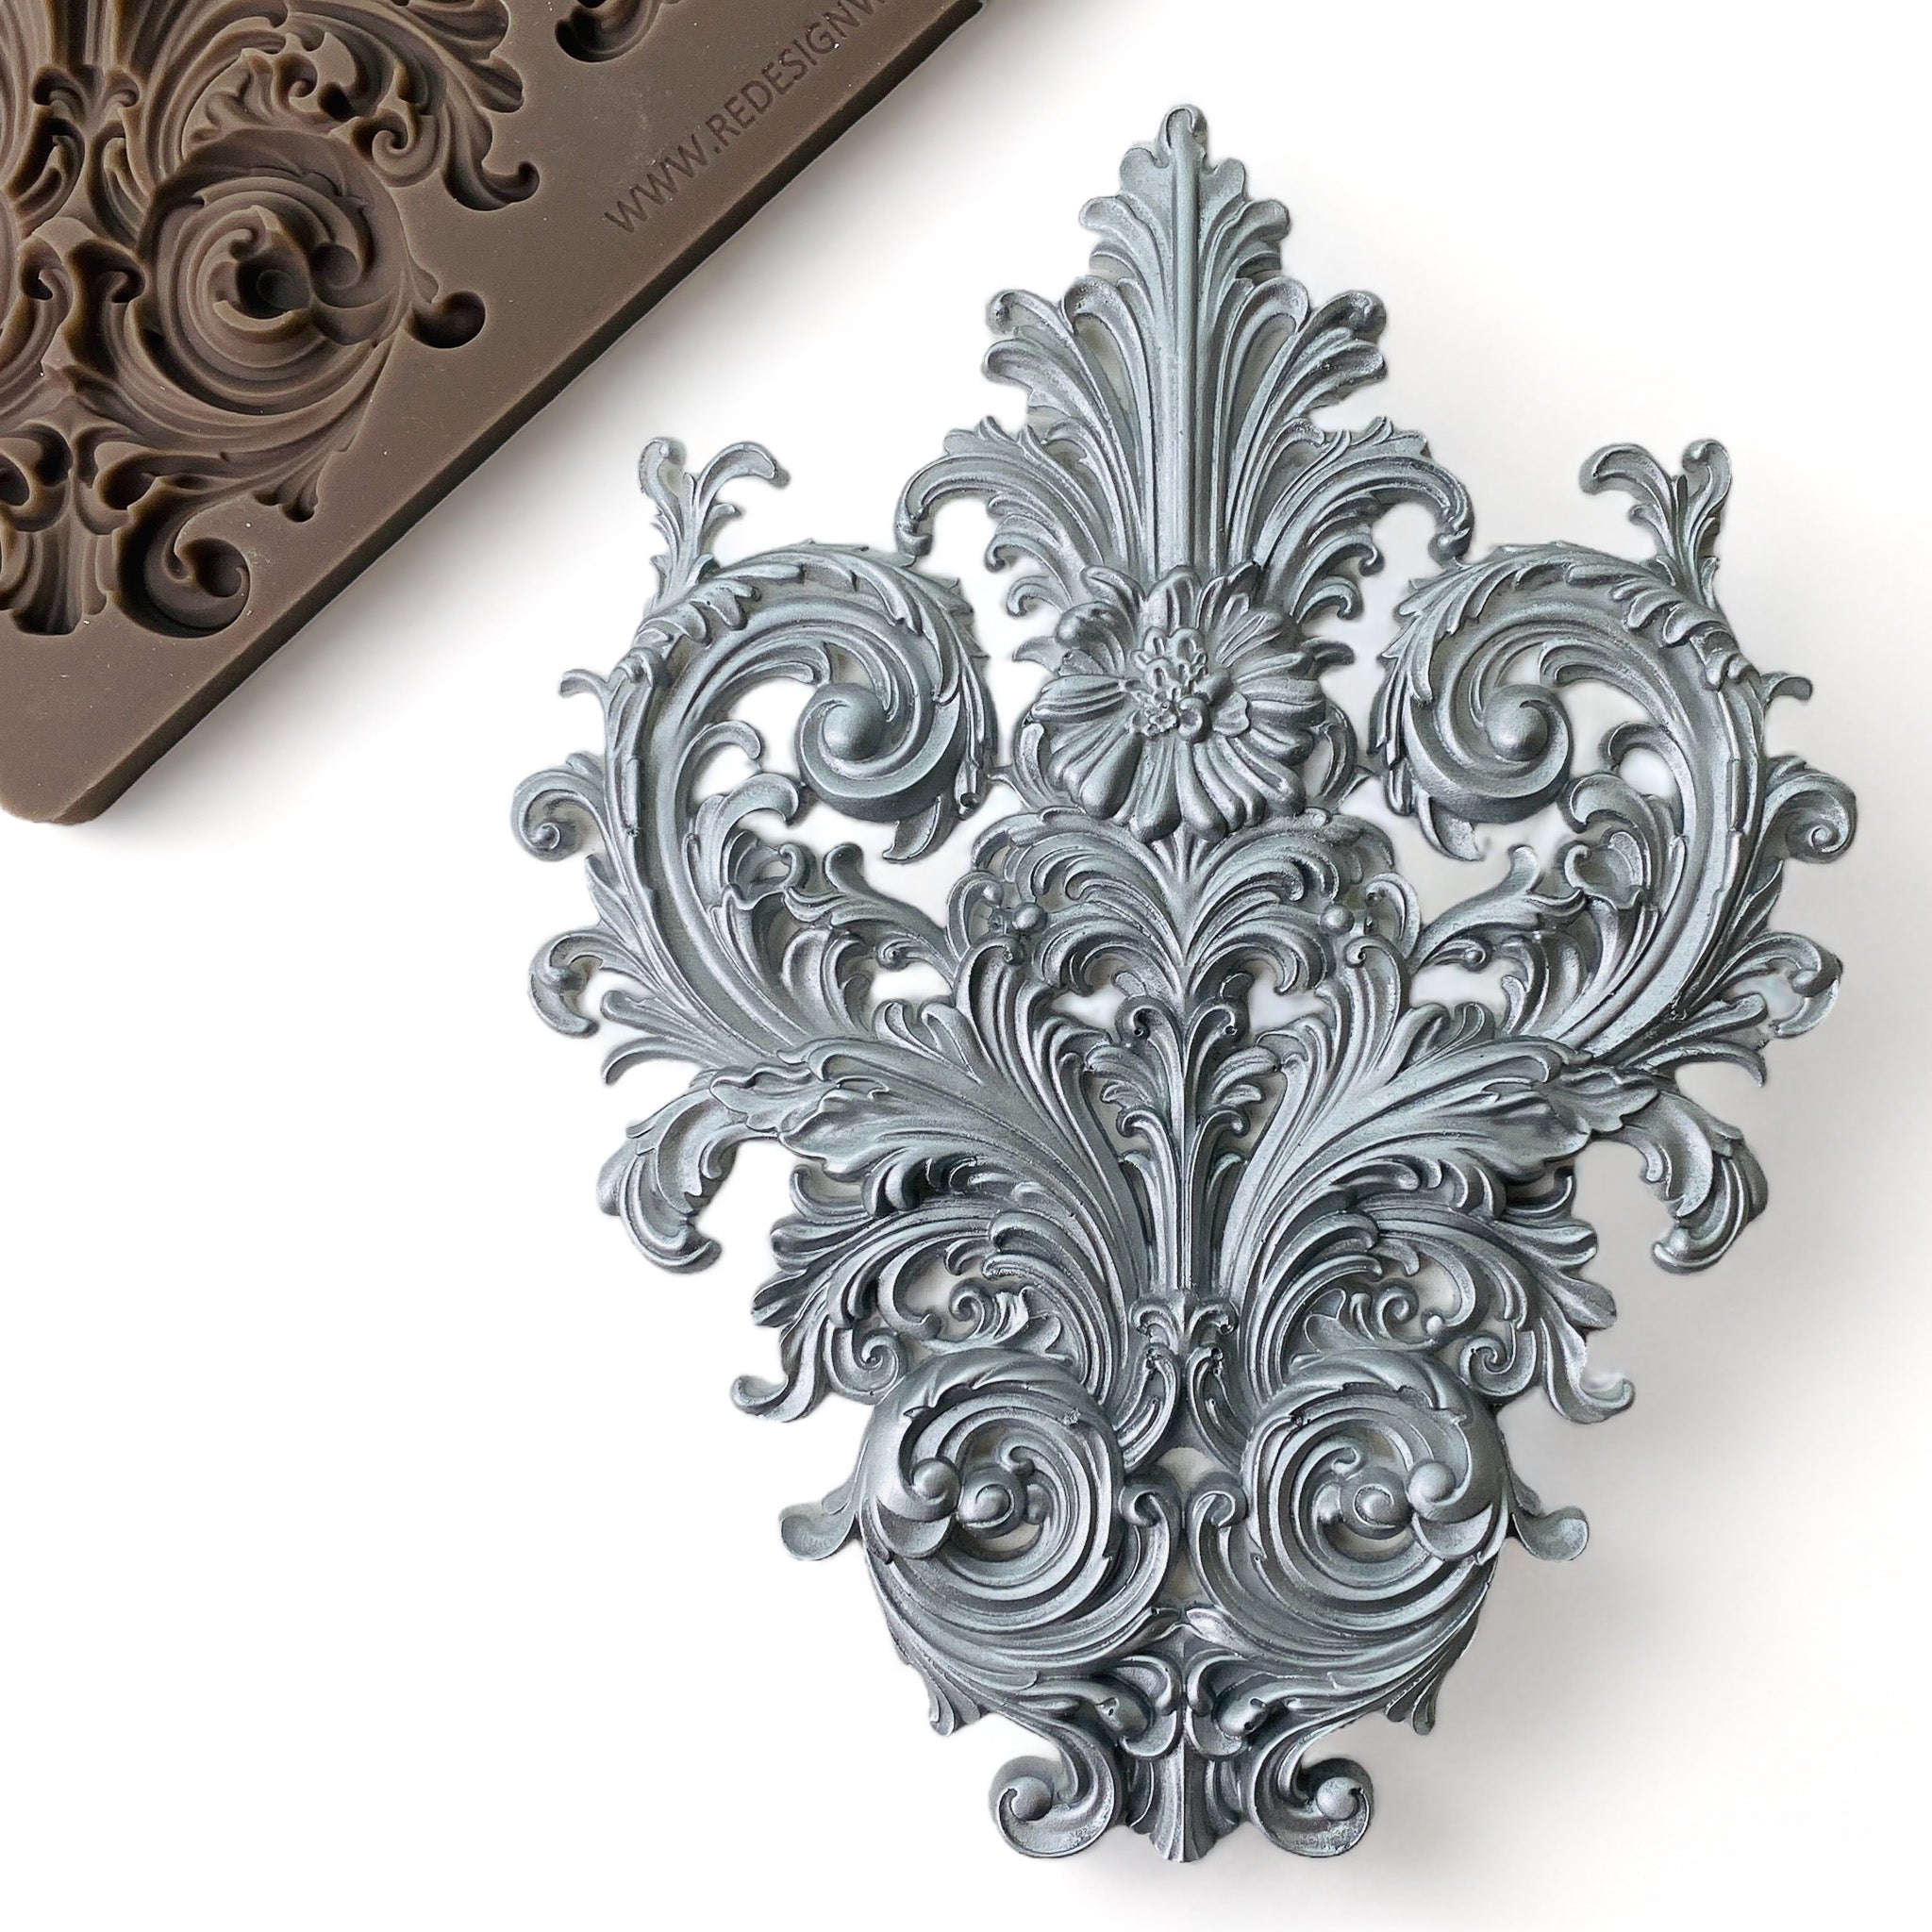 A brown silicone mold and silver-colored casting of an ornate leaf scroll design are against a white background.